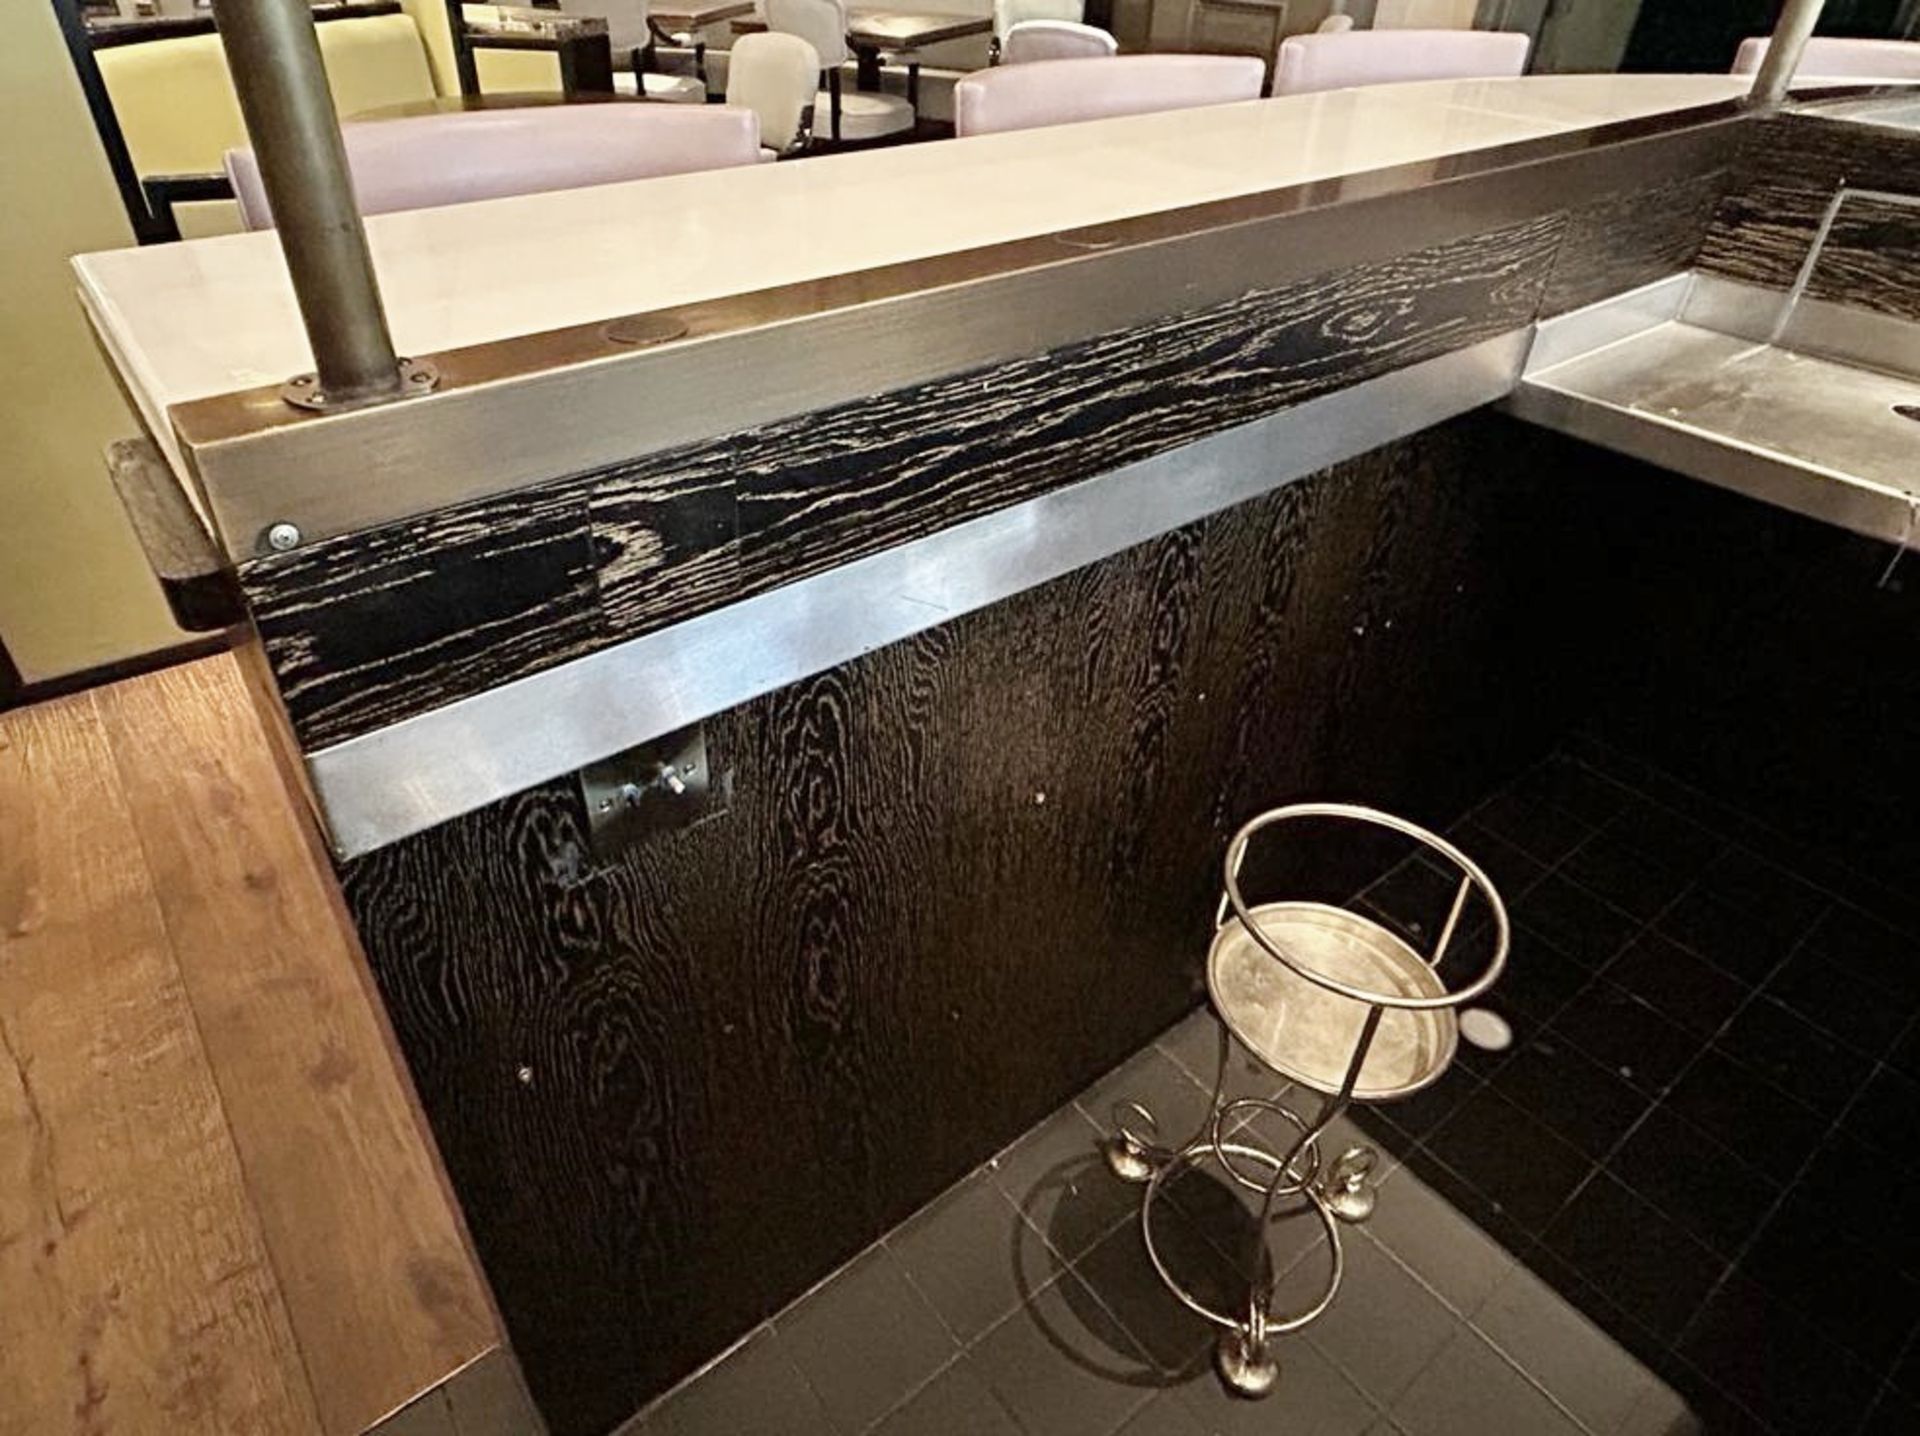 1 x Luxury Curved Restaurant 5.5-Metre Centrepiece Bar, Clad in Timber & Leather with 18 x Stools - Image 58 of 72